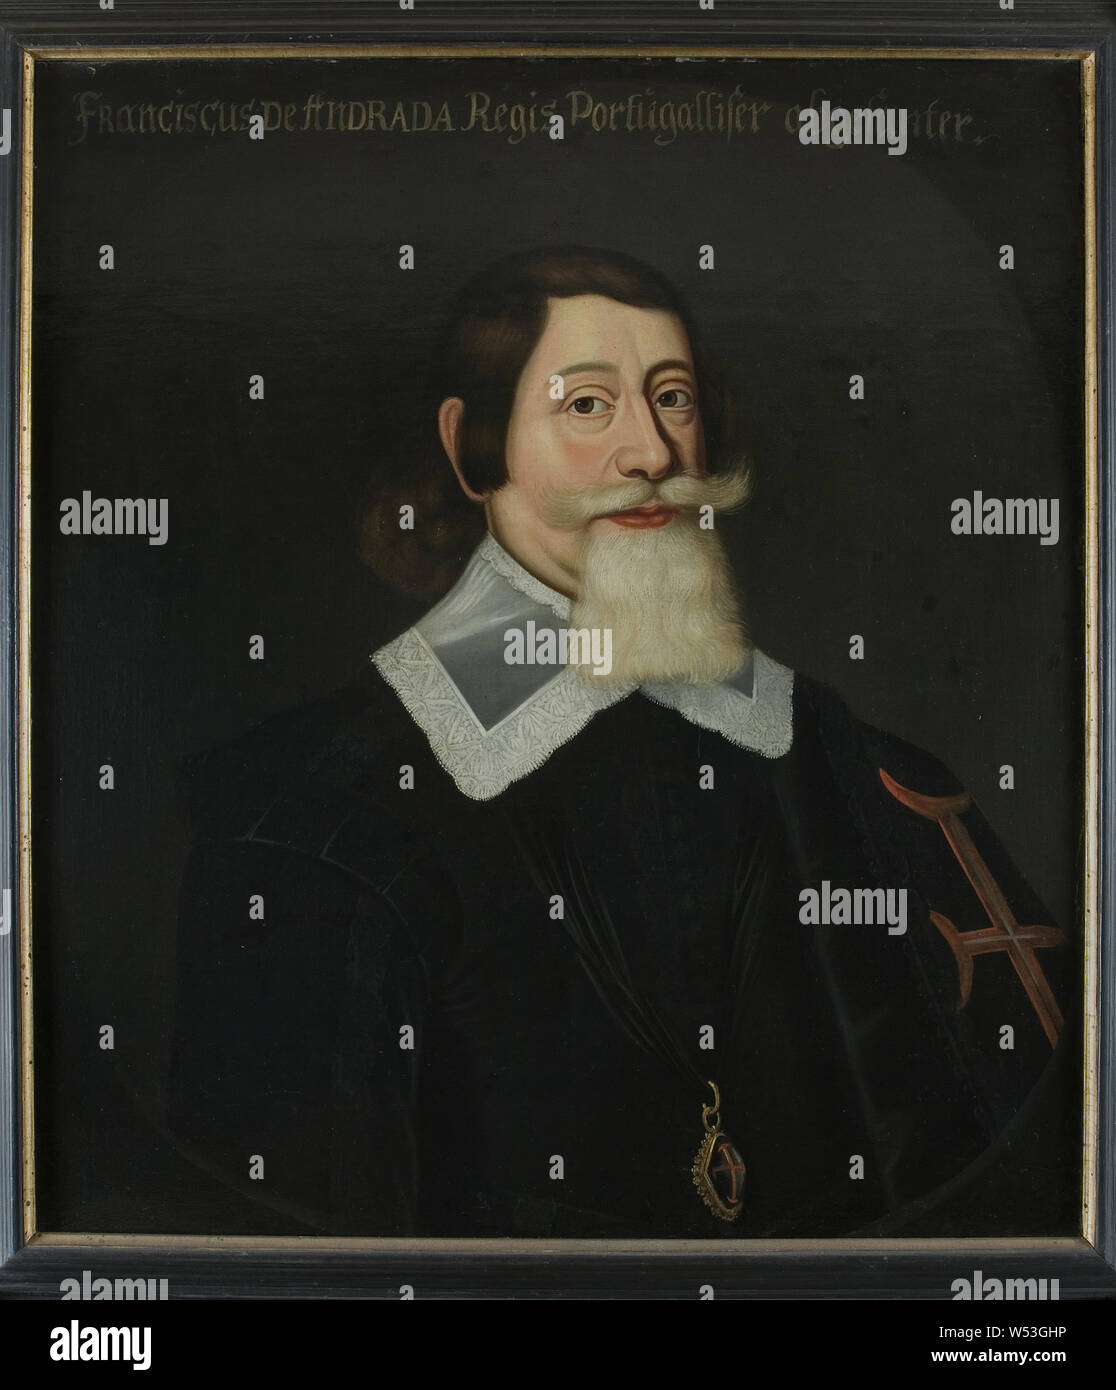 After Anselm van Hulle, Francisco d 'Andrade Søgo, Francisco d'Andrade Leitao, delegate from Portugal, painting, oil on canvas, Height, 73 cm (28.7 inches), Width, 67 cm (26.3 inches) Stock Photo